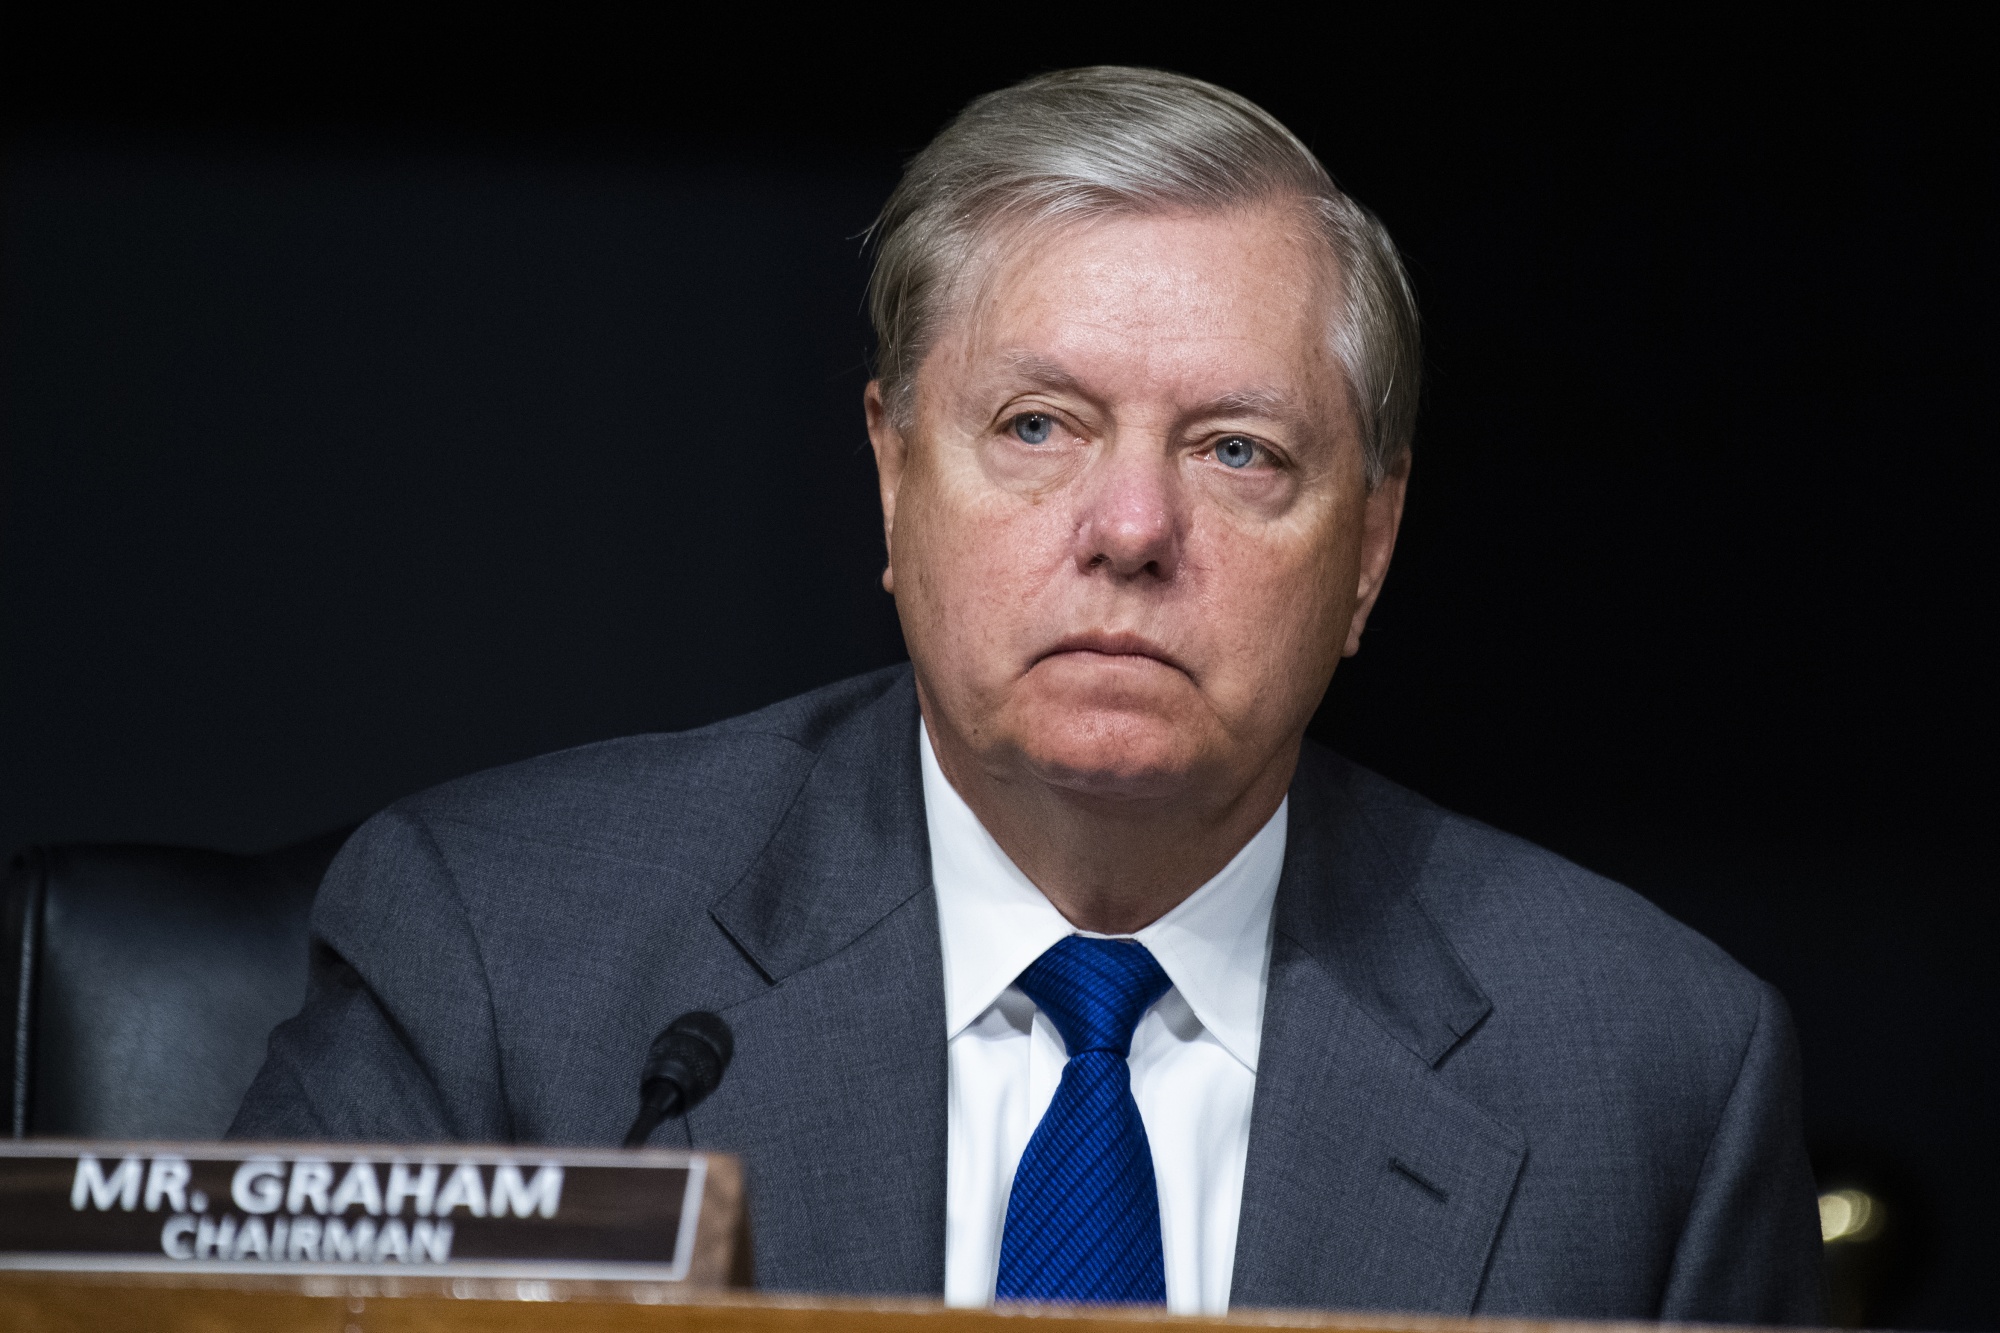 Lindsey Graham during a hearing in Washington on June 2.